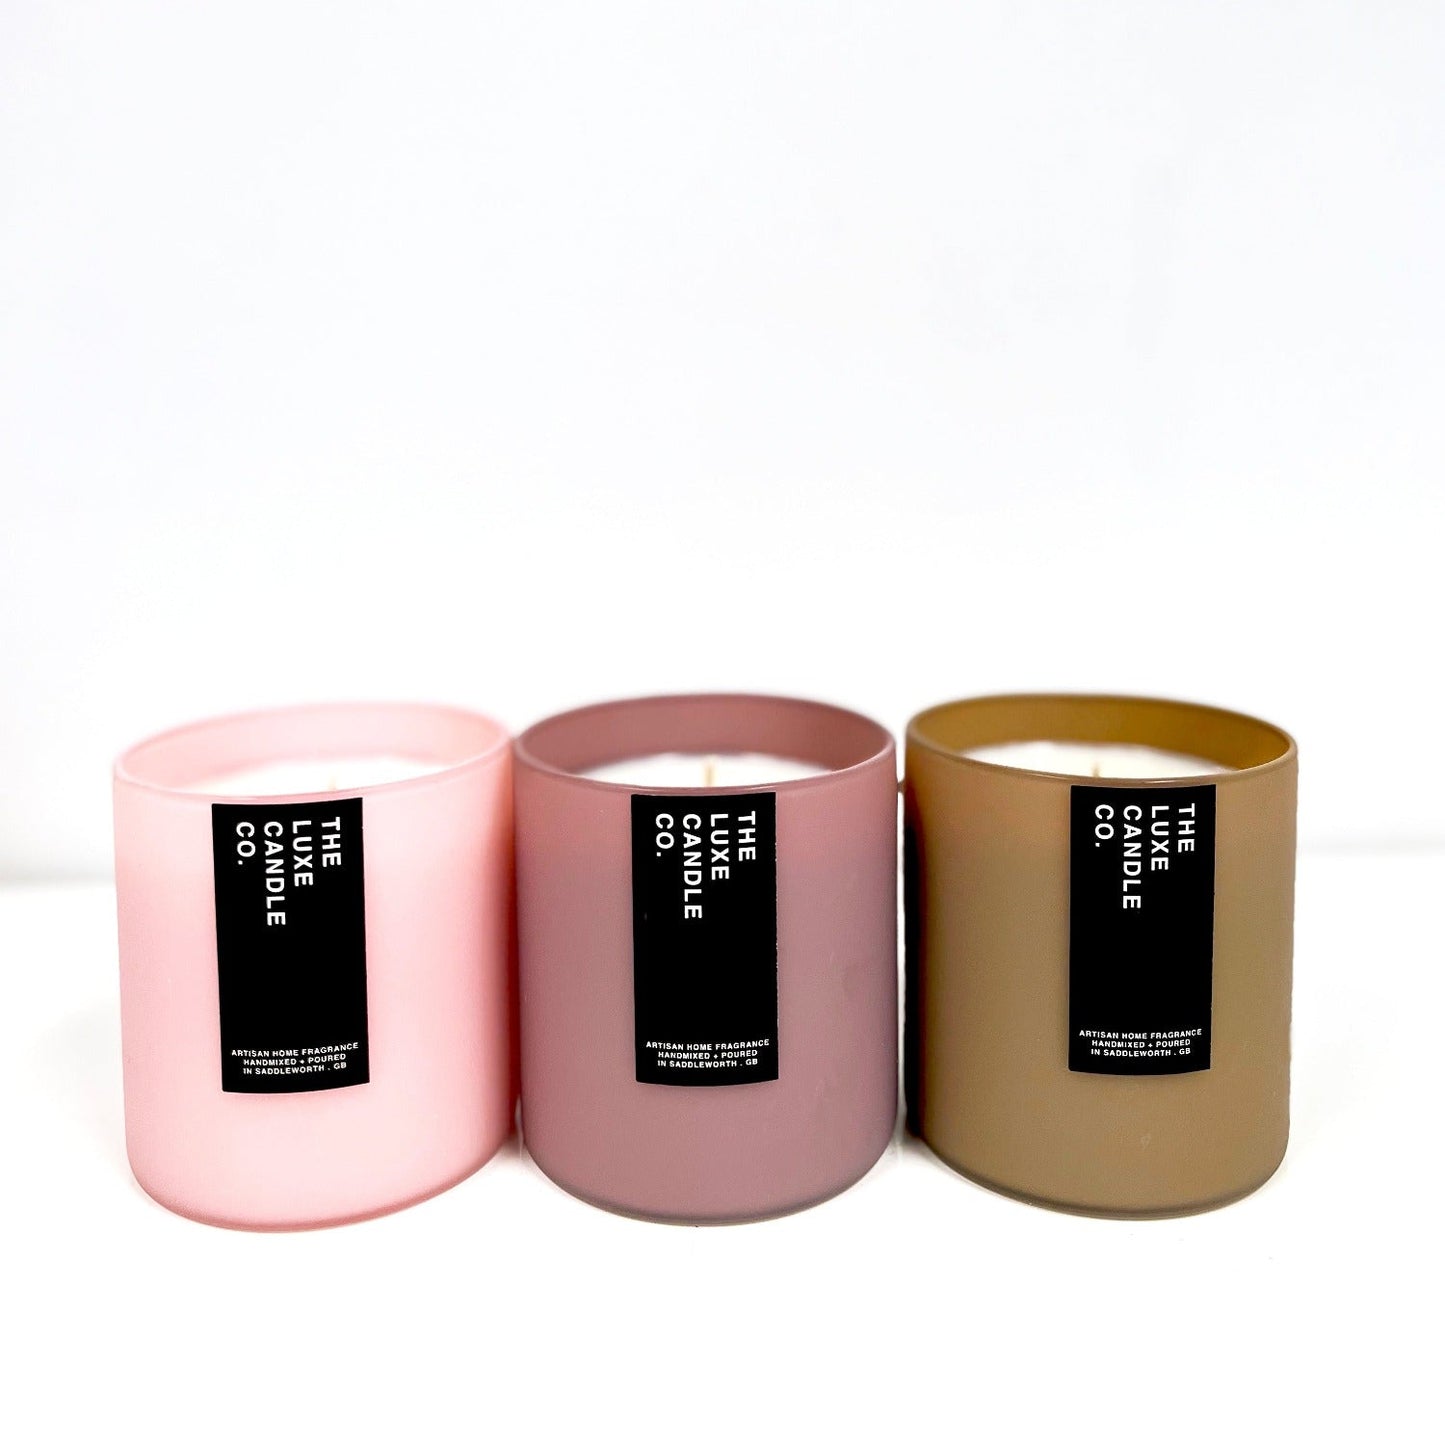 Nag Champa soy wax candles by The Luxe Co . Beautiful scented candles in nag champa to chill relax and zenify your space in muted shades for spring